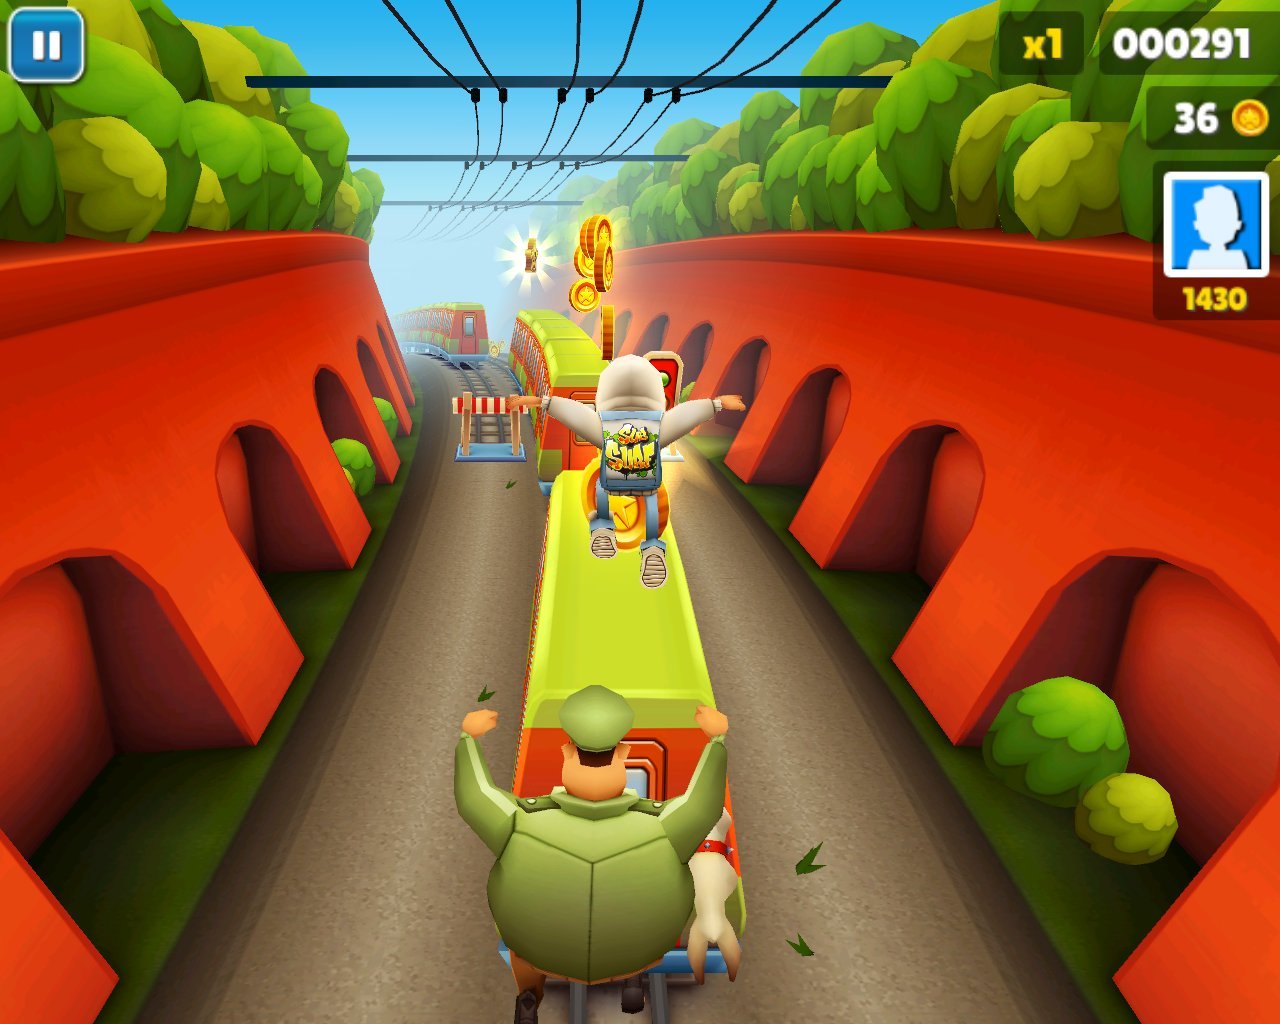 subway surfers game free download for pc windows 7 32-bit torrent